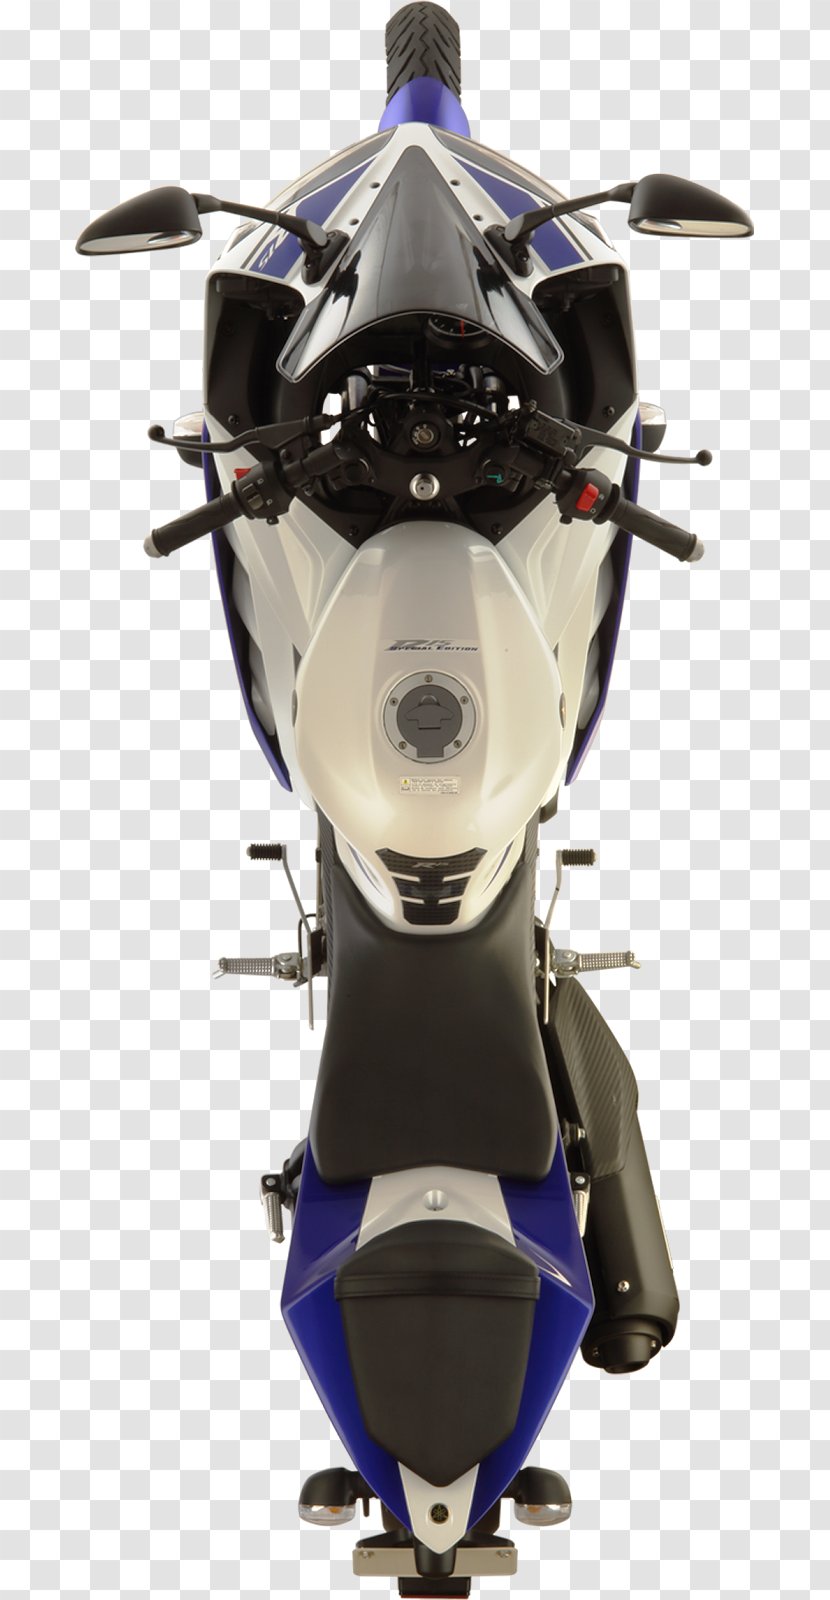 Yamaha Motor Company YZF-R15 Motorcycle India Suzuki - Personal Protective Equipment Transparent PNG